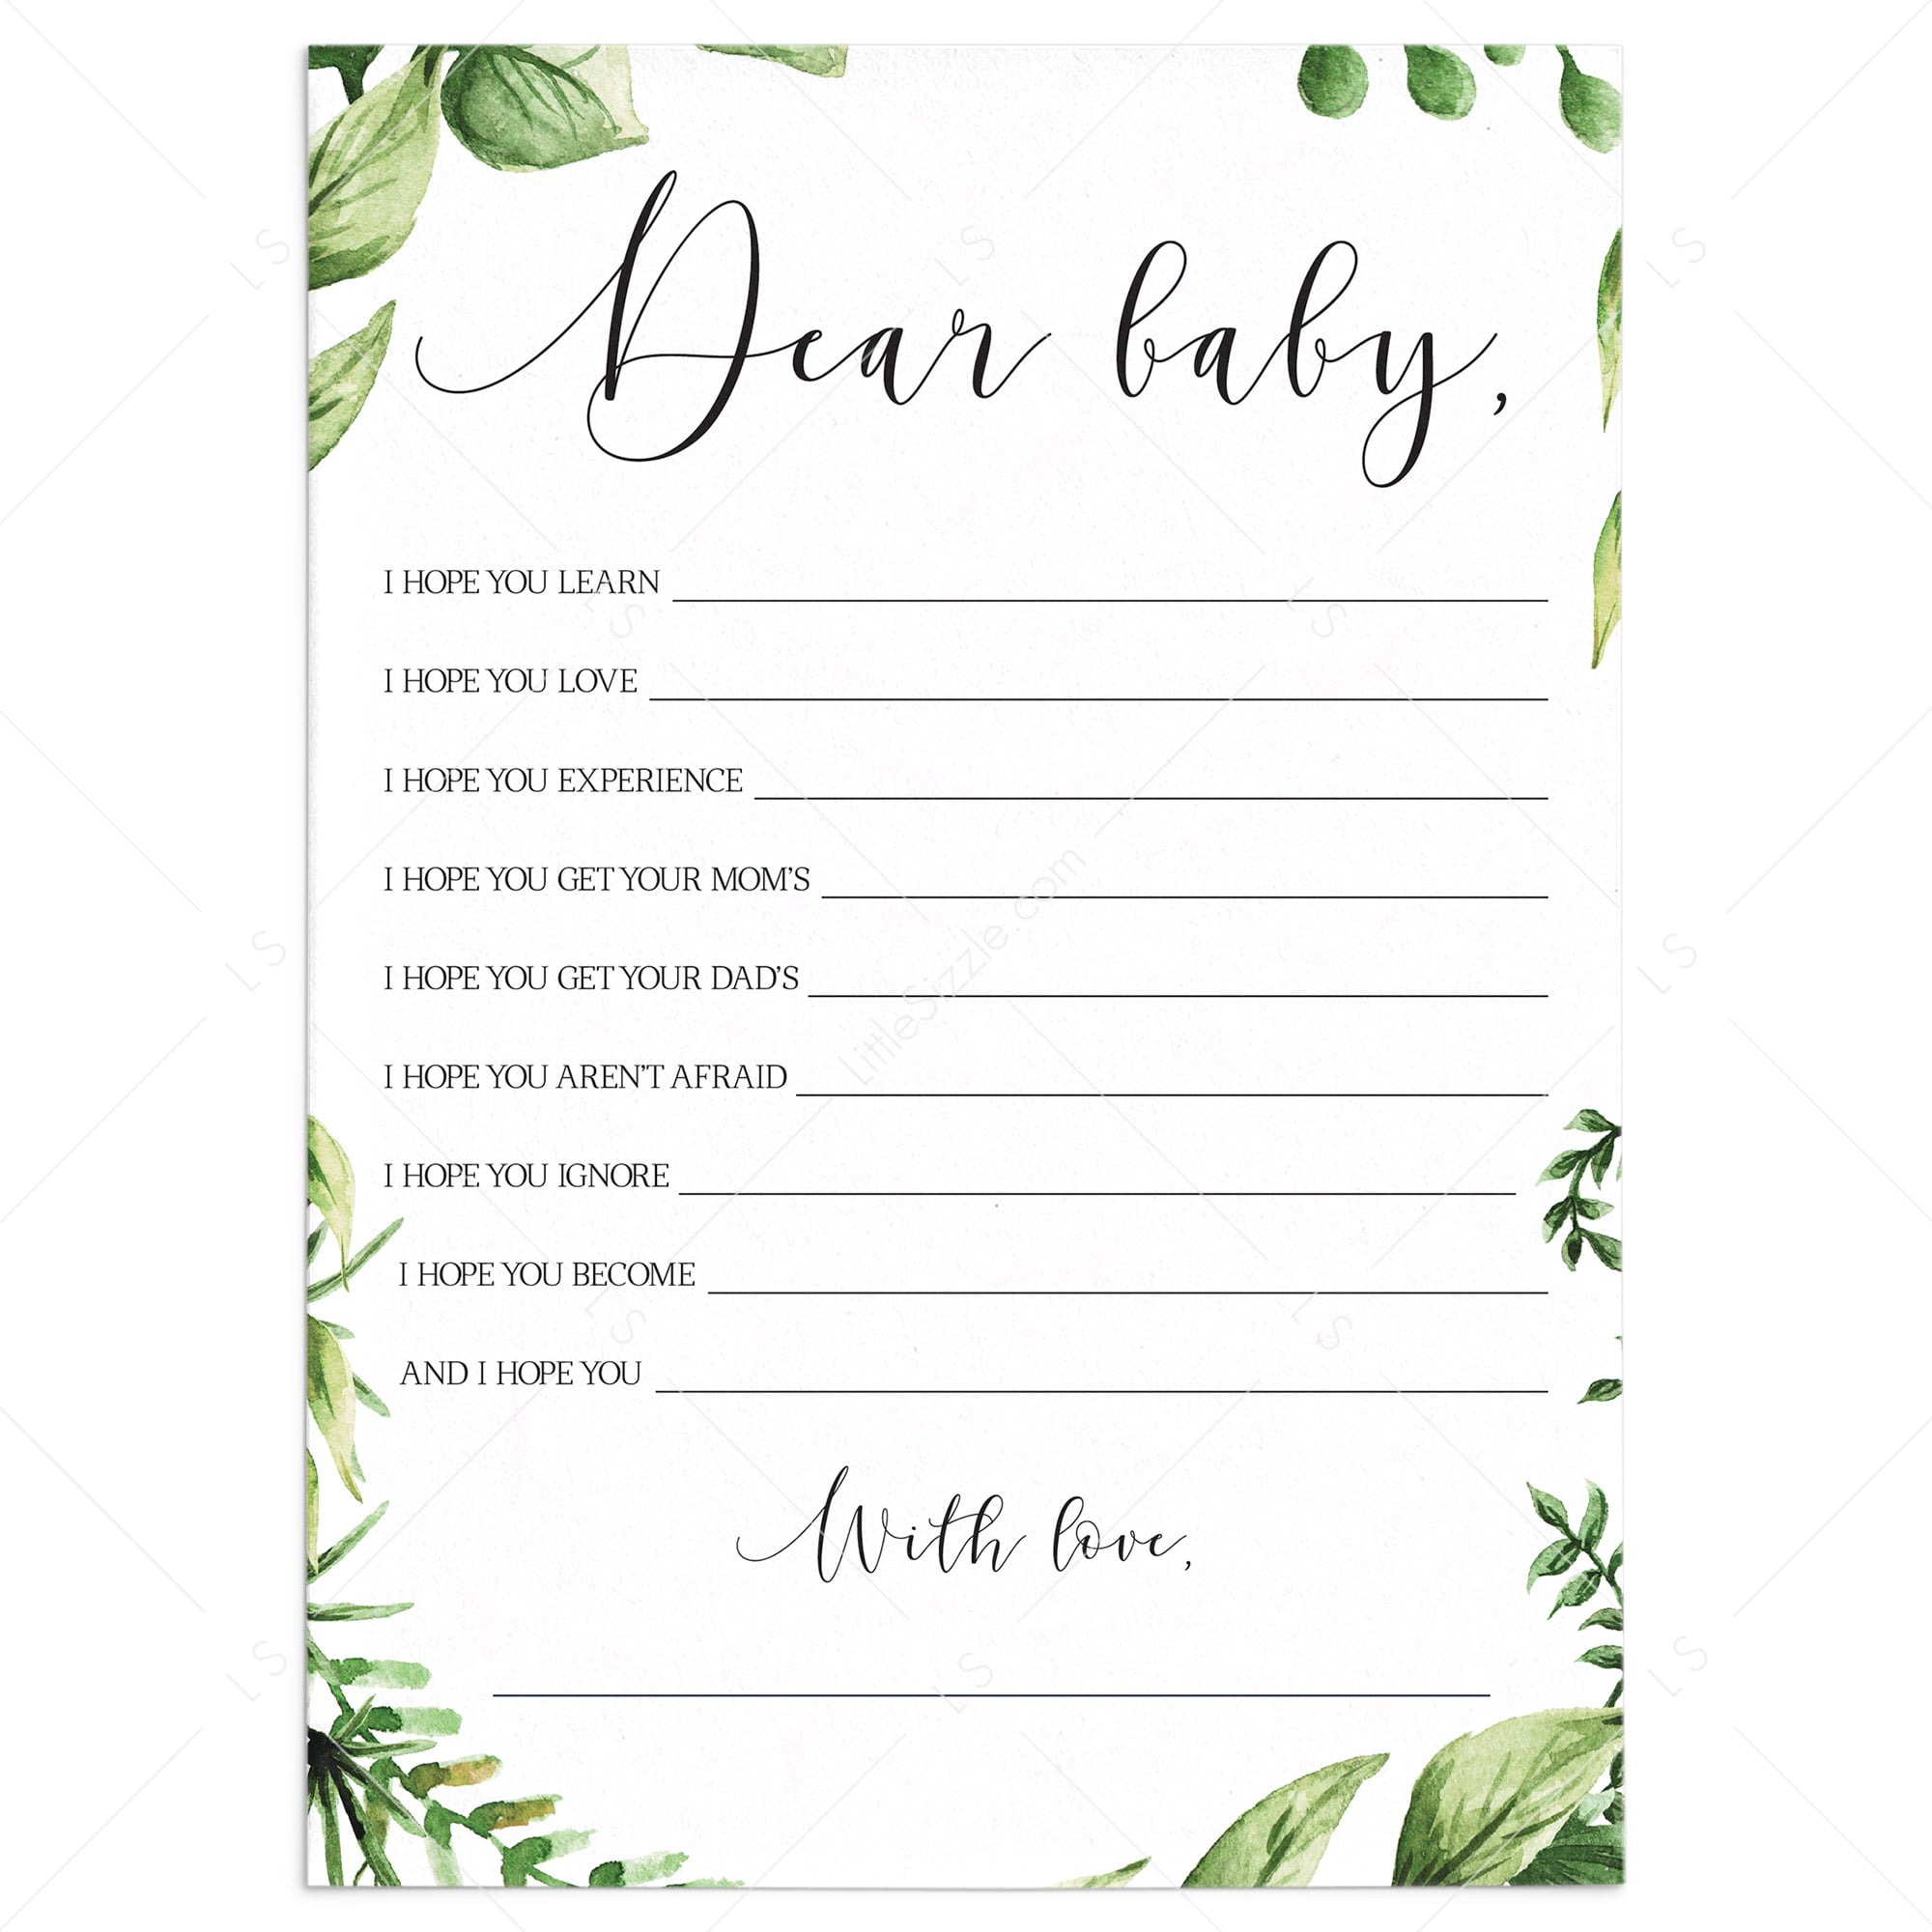 Baby Wish cards printable for greenery baby shower by LittleSizzle